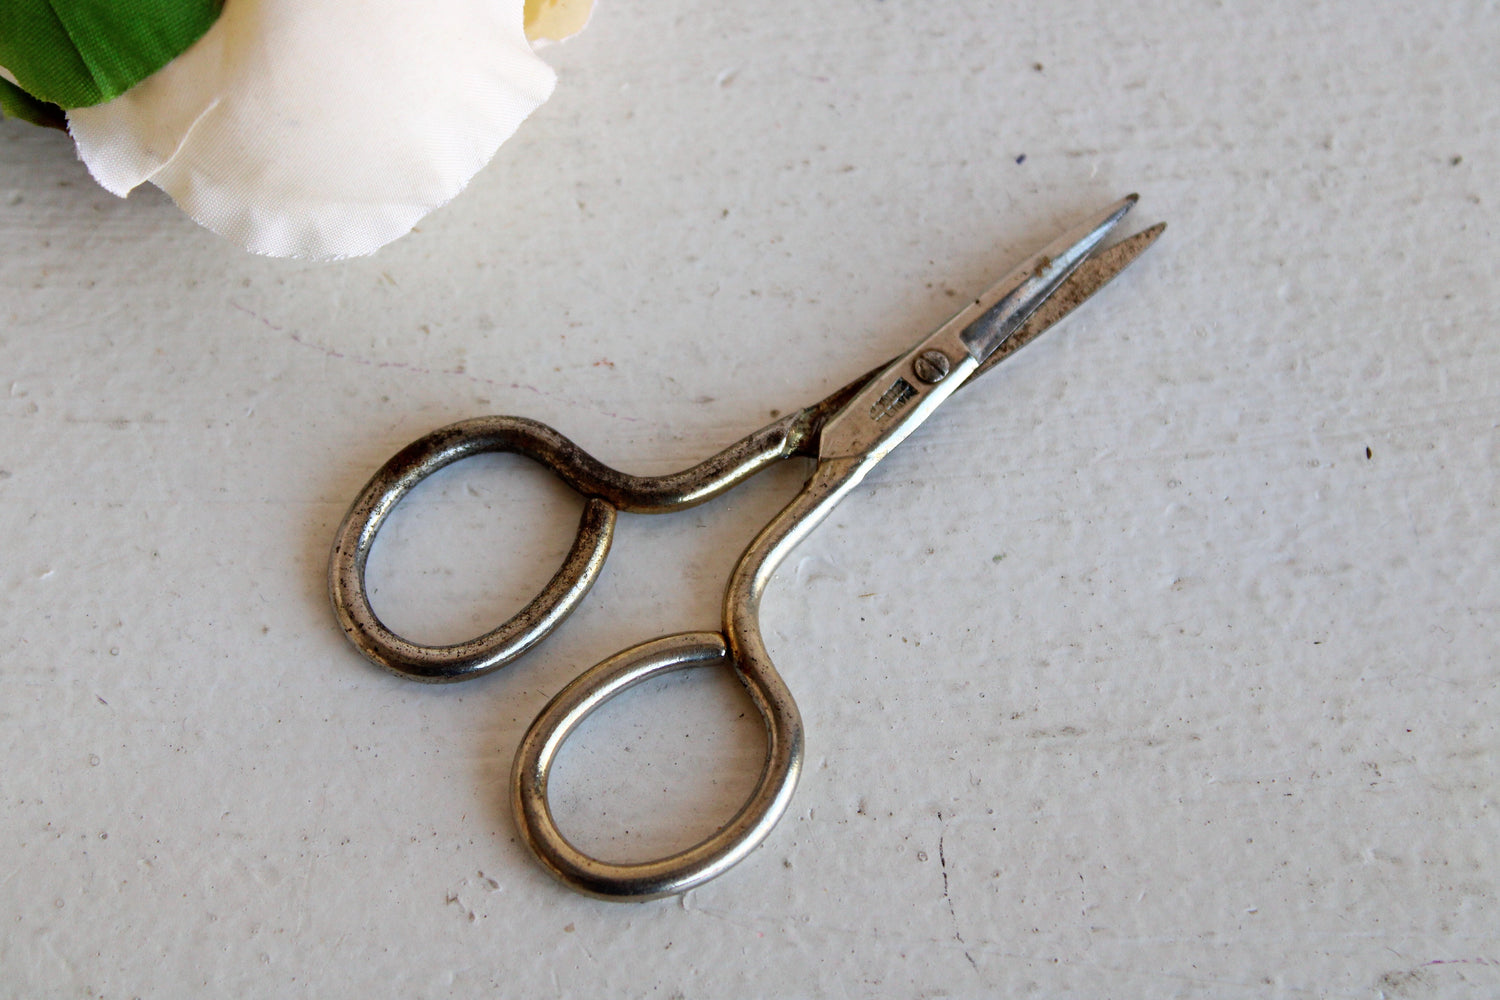 Vintage 1940s 1950s Embroidery Scissors From Germany